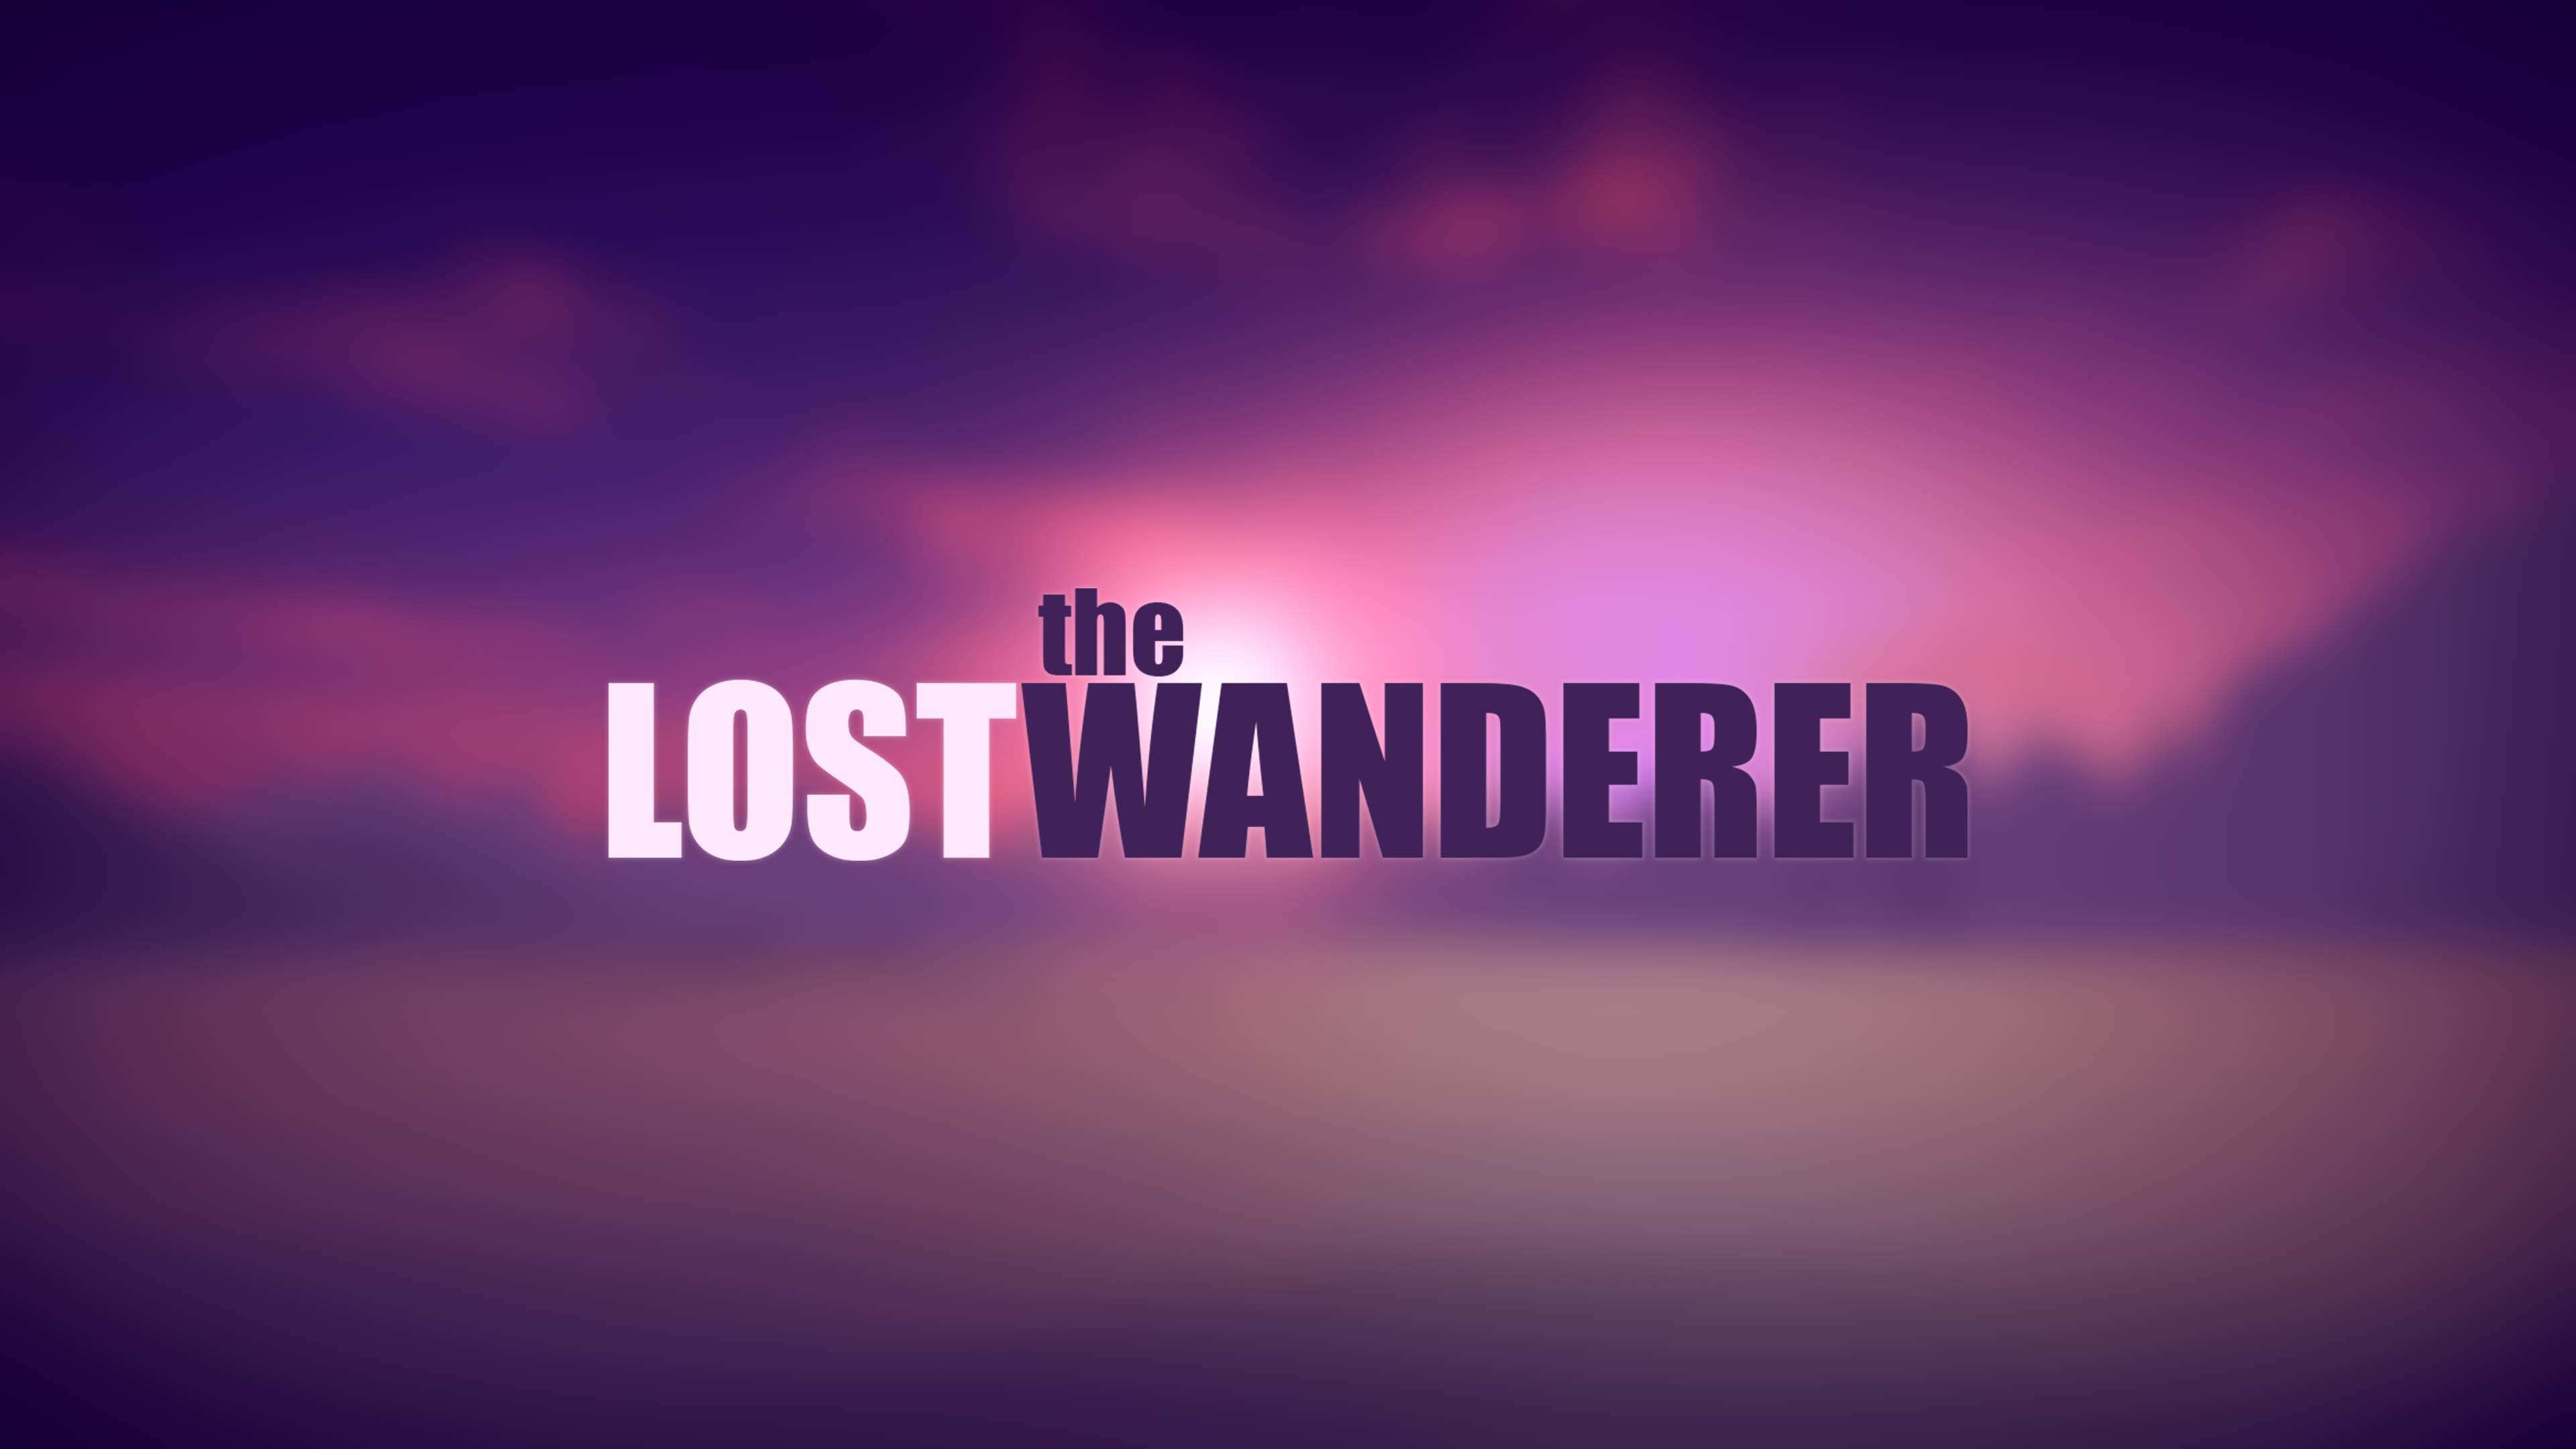 The Lost Wanderer